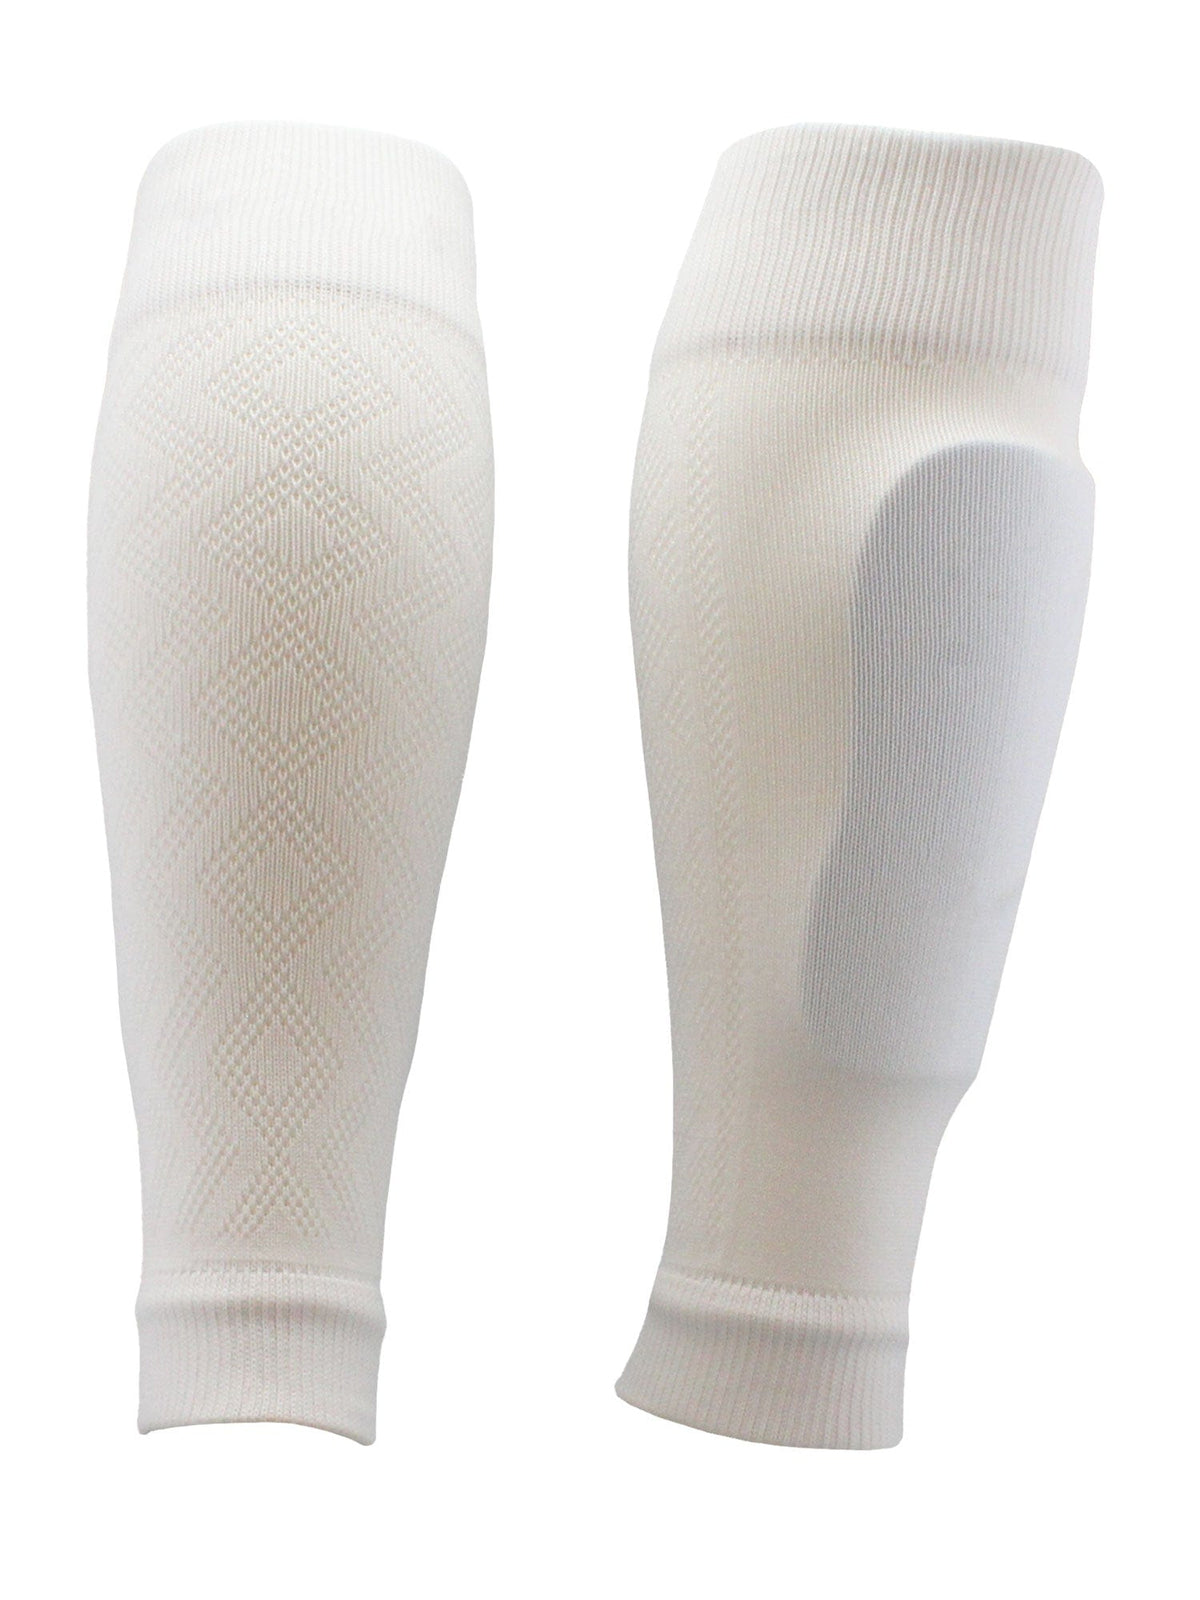 Wholesale Soccer Grip Socks In A Range Of Cuts And Colors For